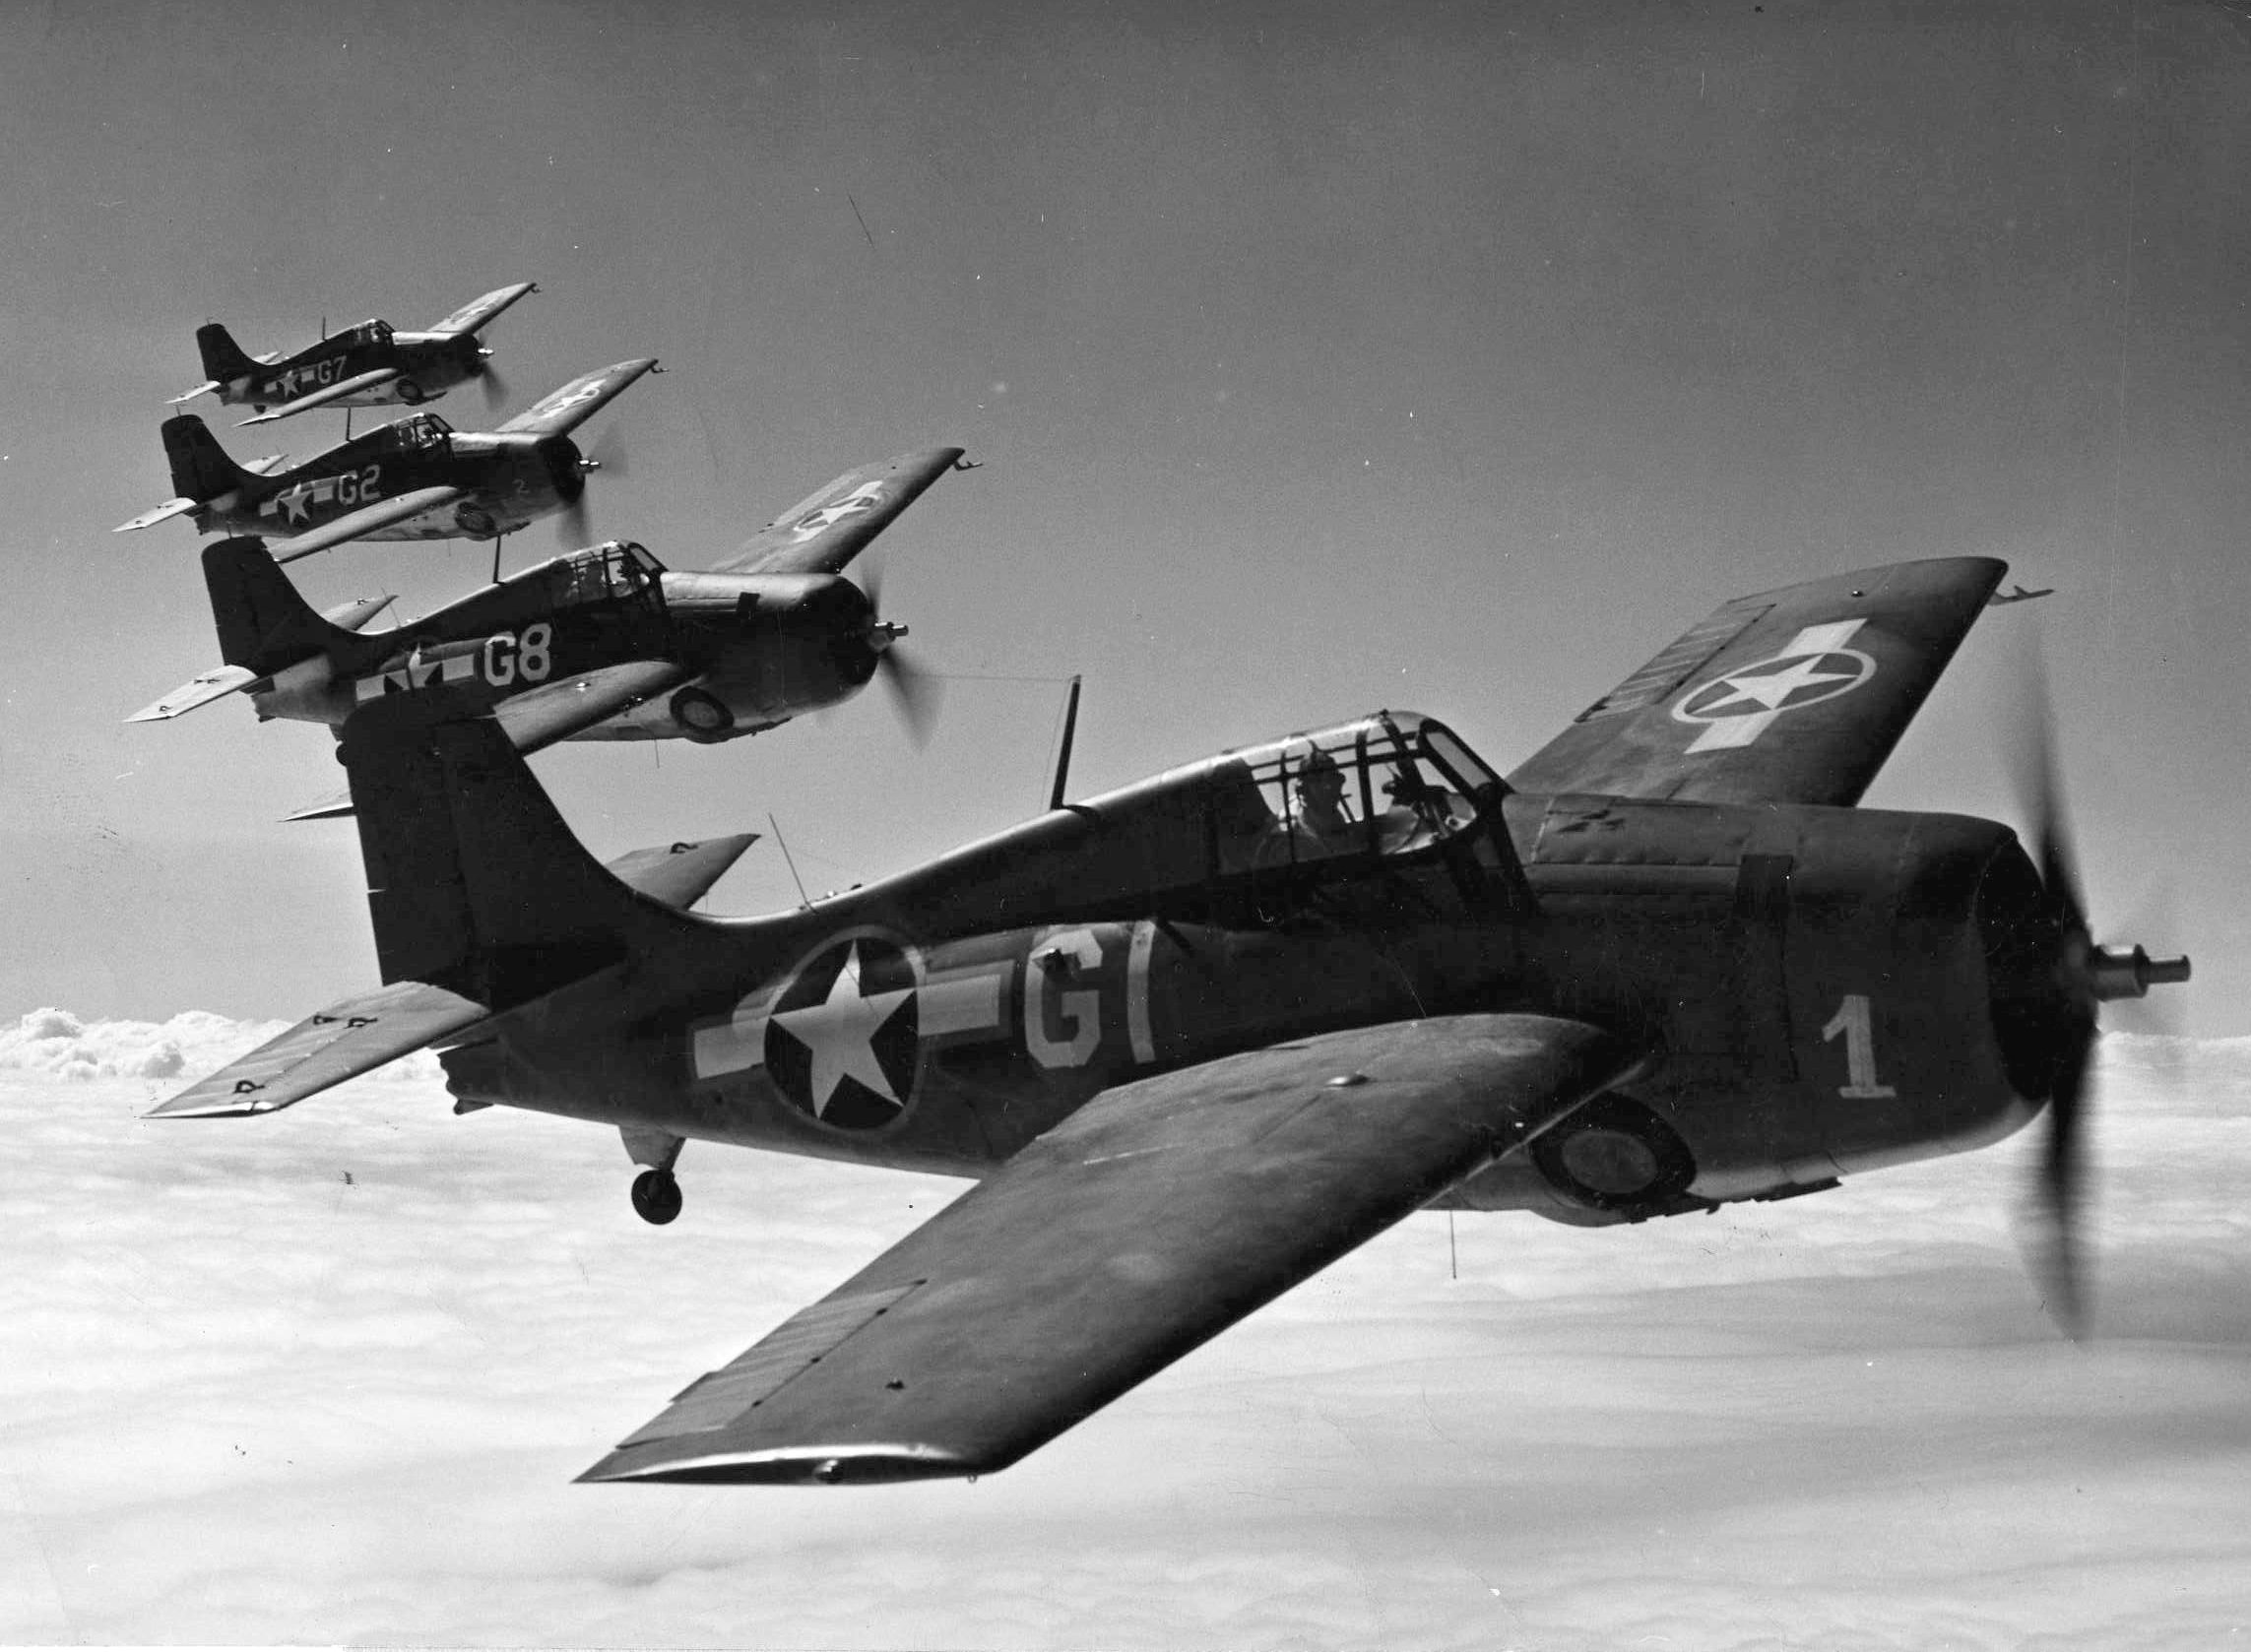 A formation of Grumman F4F Wildcat fighter planes banks slowly to the right. Wildcats flown by U.S. Marine Corps aviators based at Henderson Field on Guadalcanal were instrumental in maintaining daylight air superiority and securing the island. (National Archives)